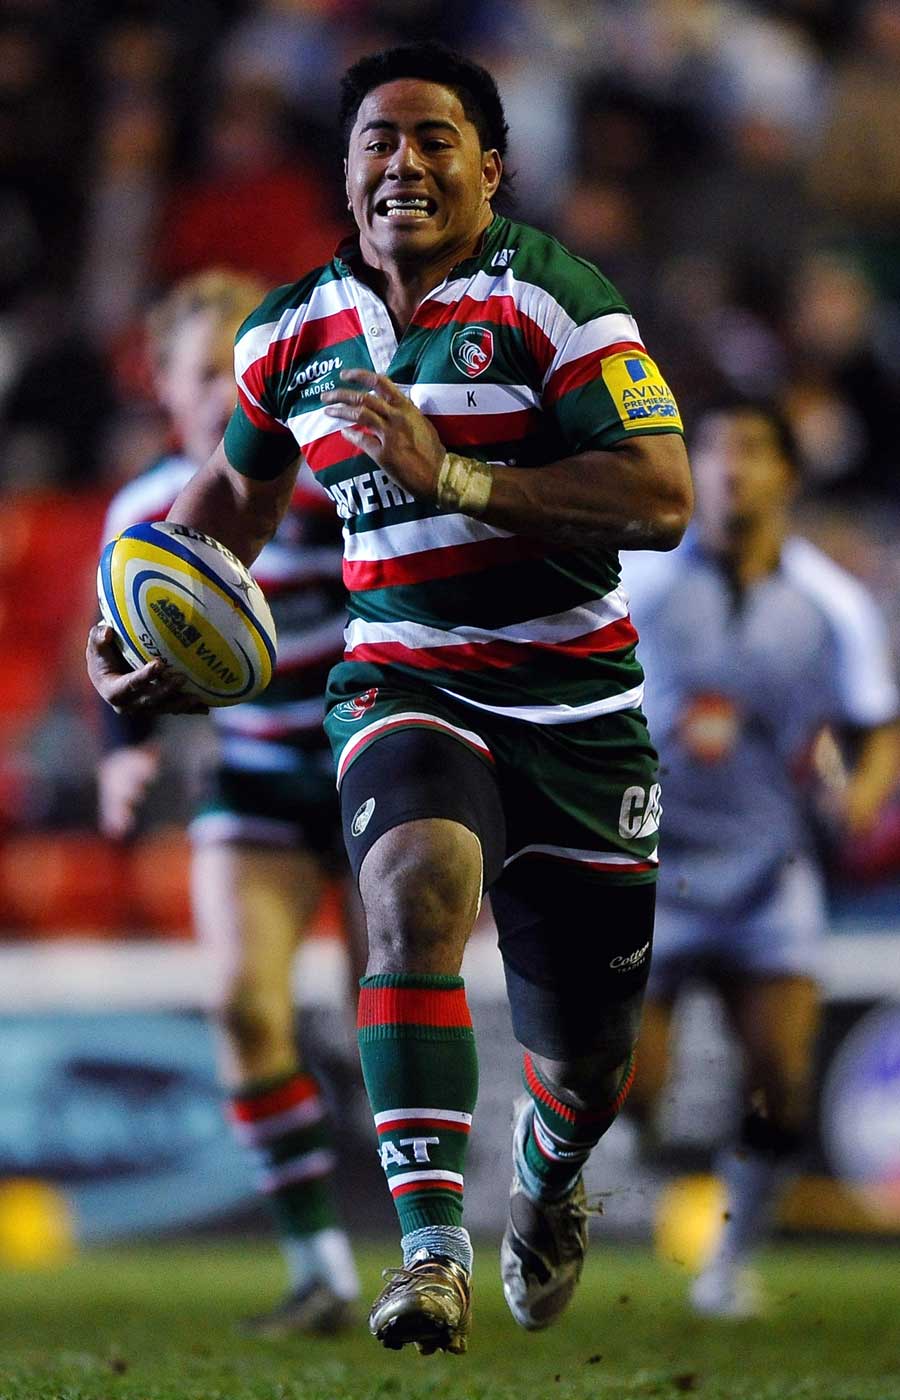 Manu Tuilagi races clear for Leicester